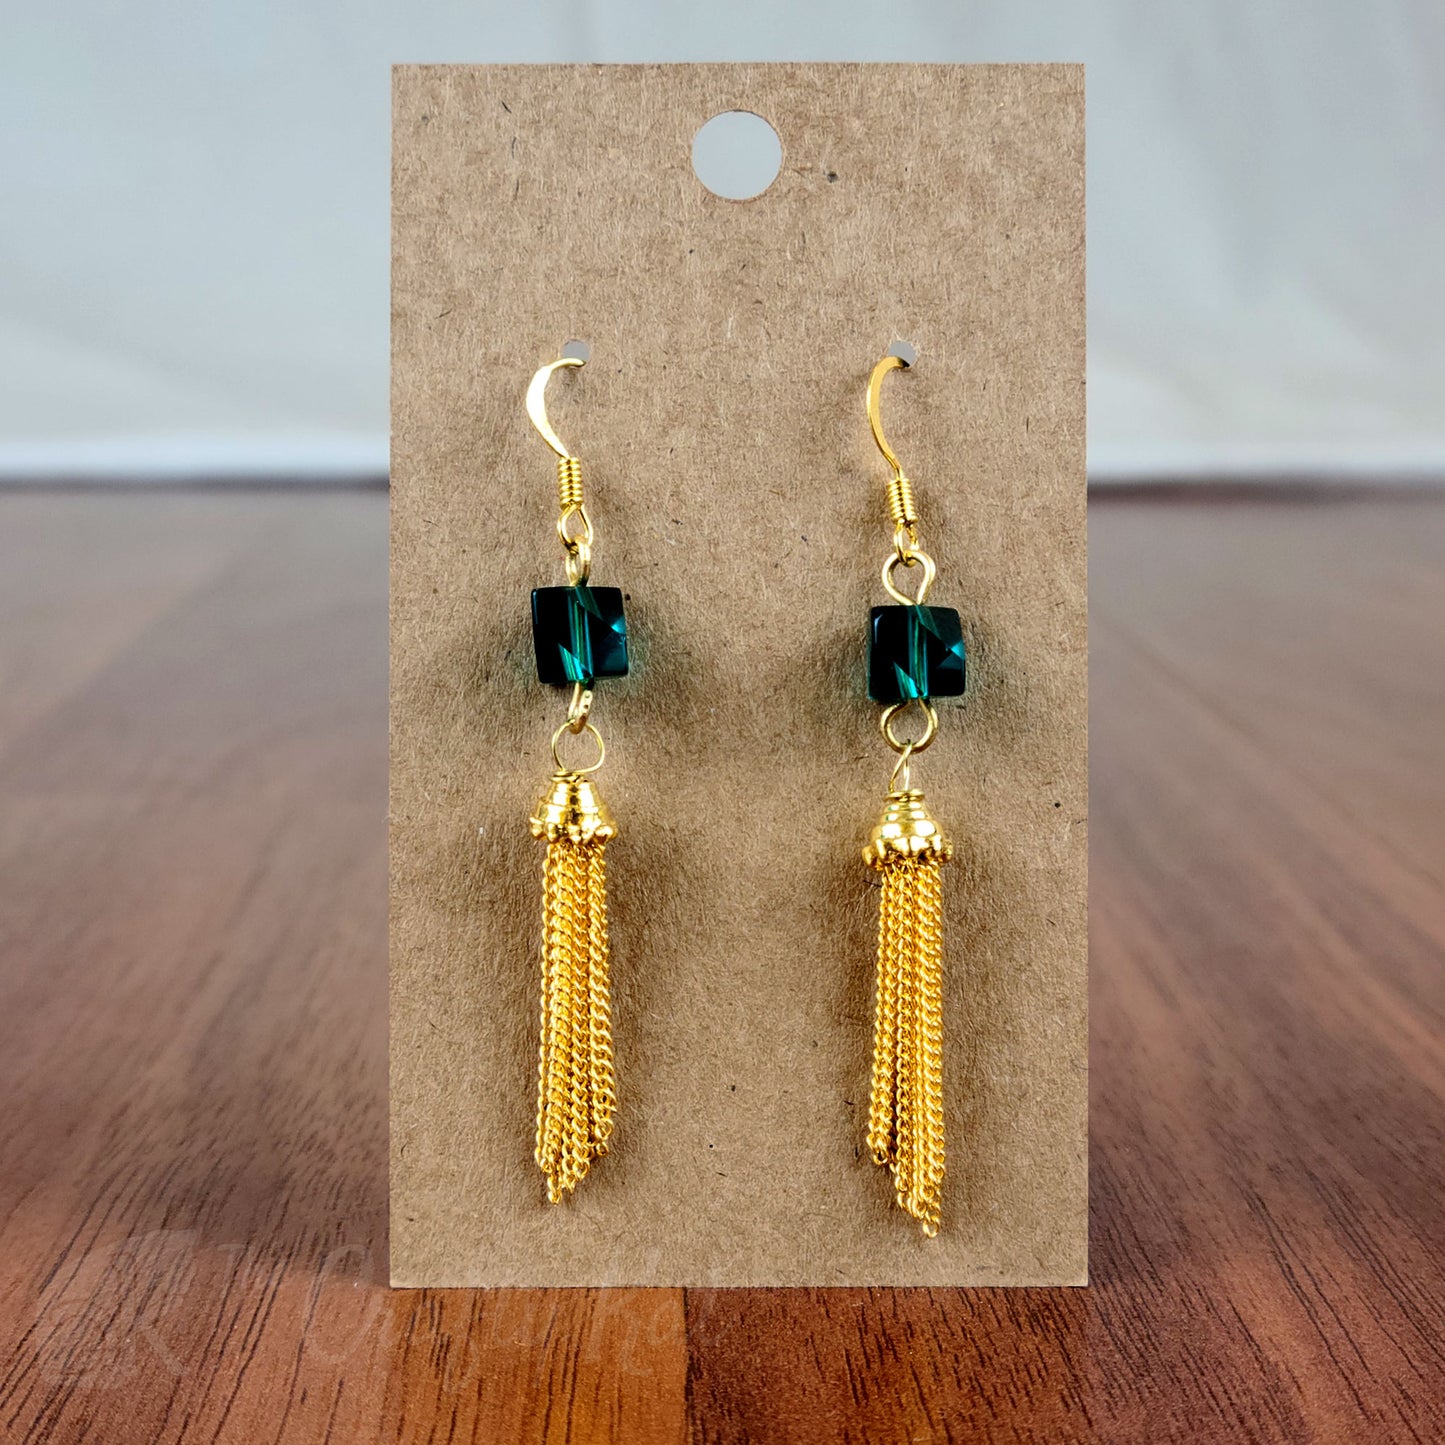 Drop earring featuring a dark teal angle-cut cube crystal bead and gold chain tassle and fittings